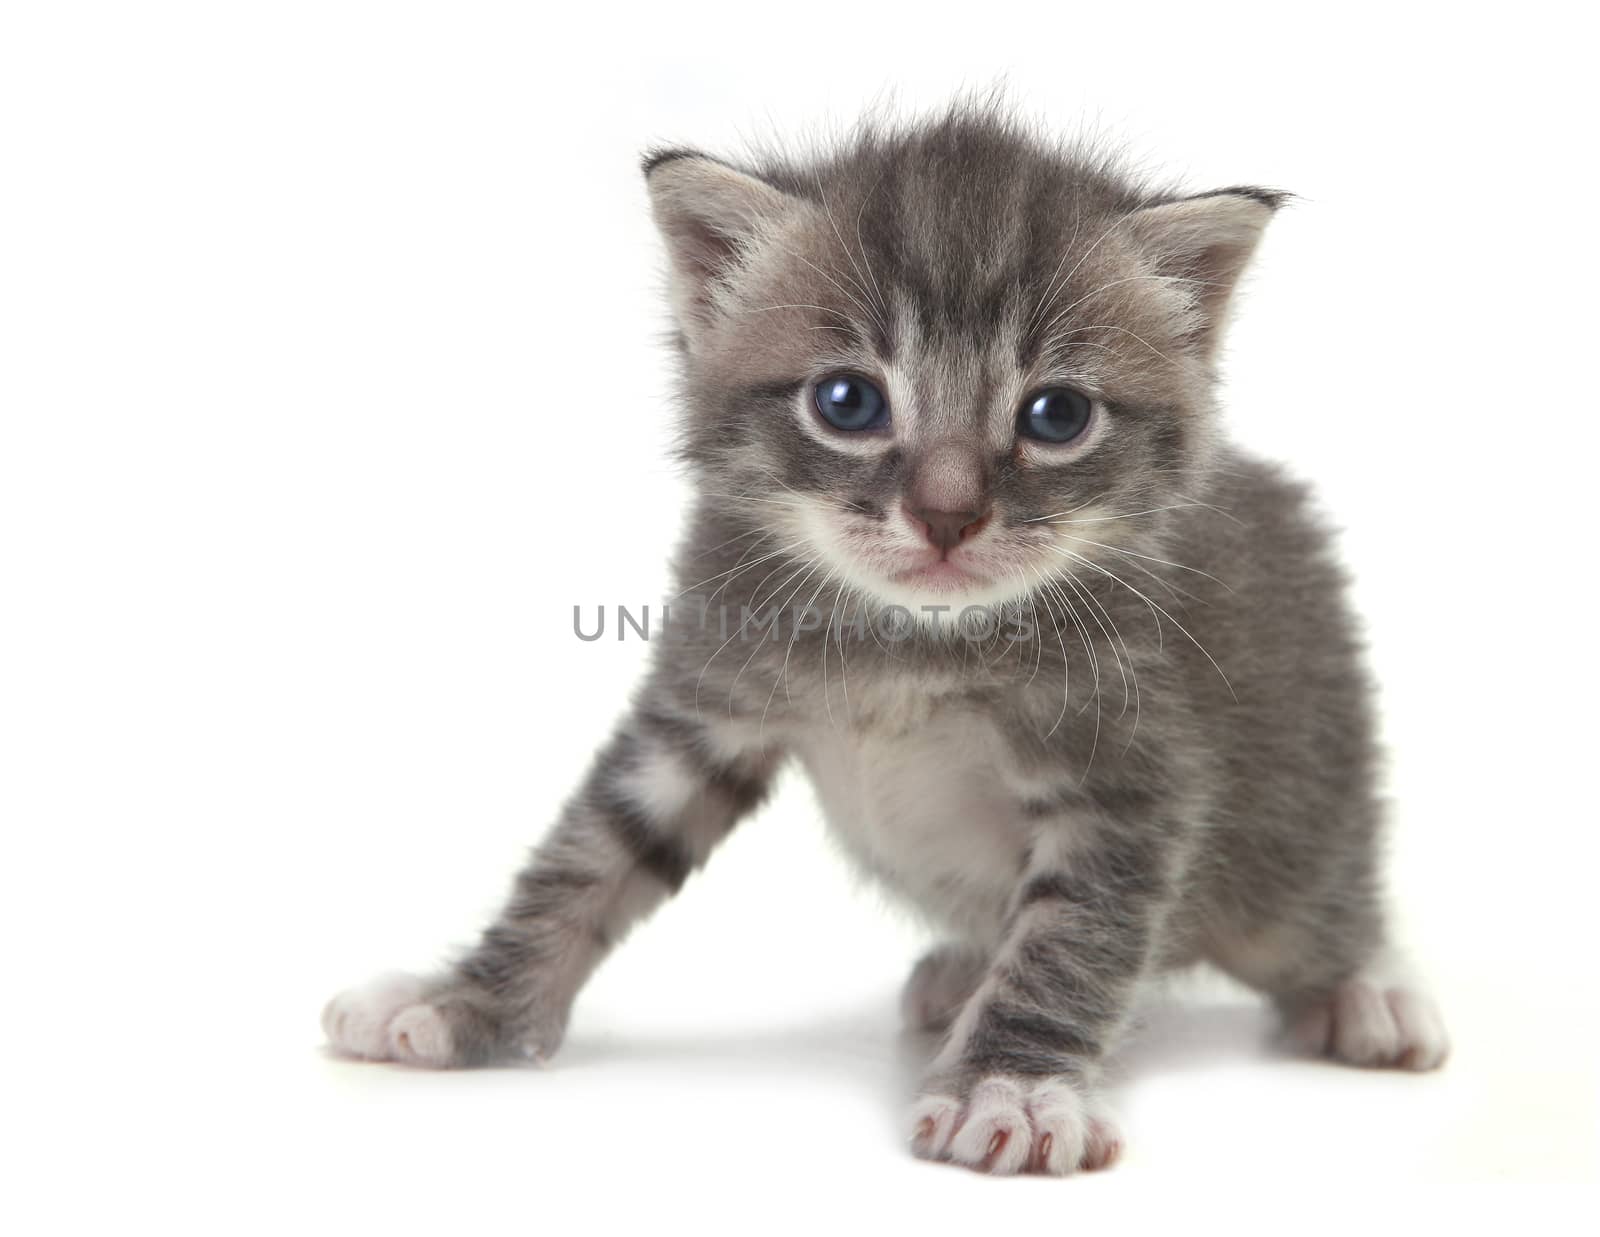 Baby Cute Kitten on a White Background by tobkatrina